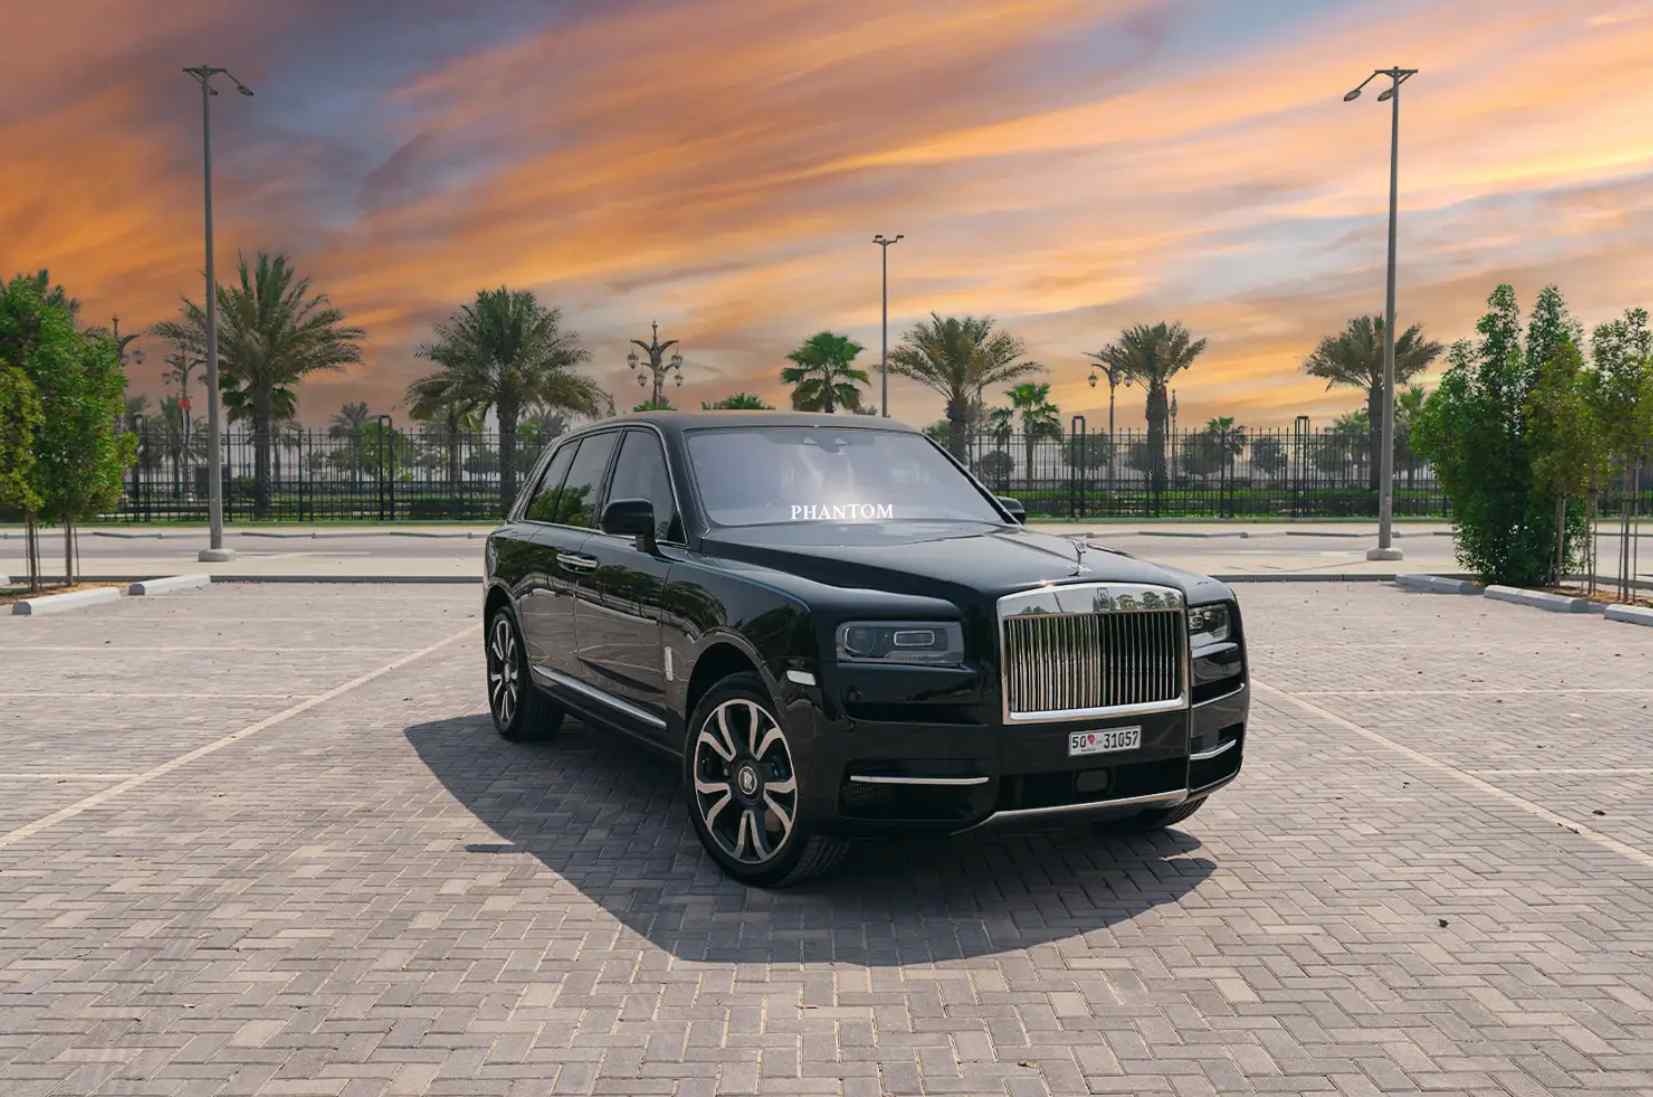 Phantom Rent-A-Car offers an unparalleled adventure in the UAE with a fleet of dream cars and top-notch services.